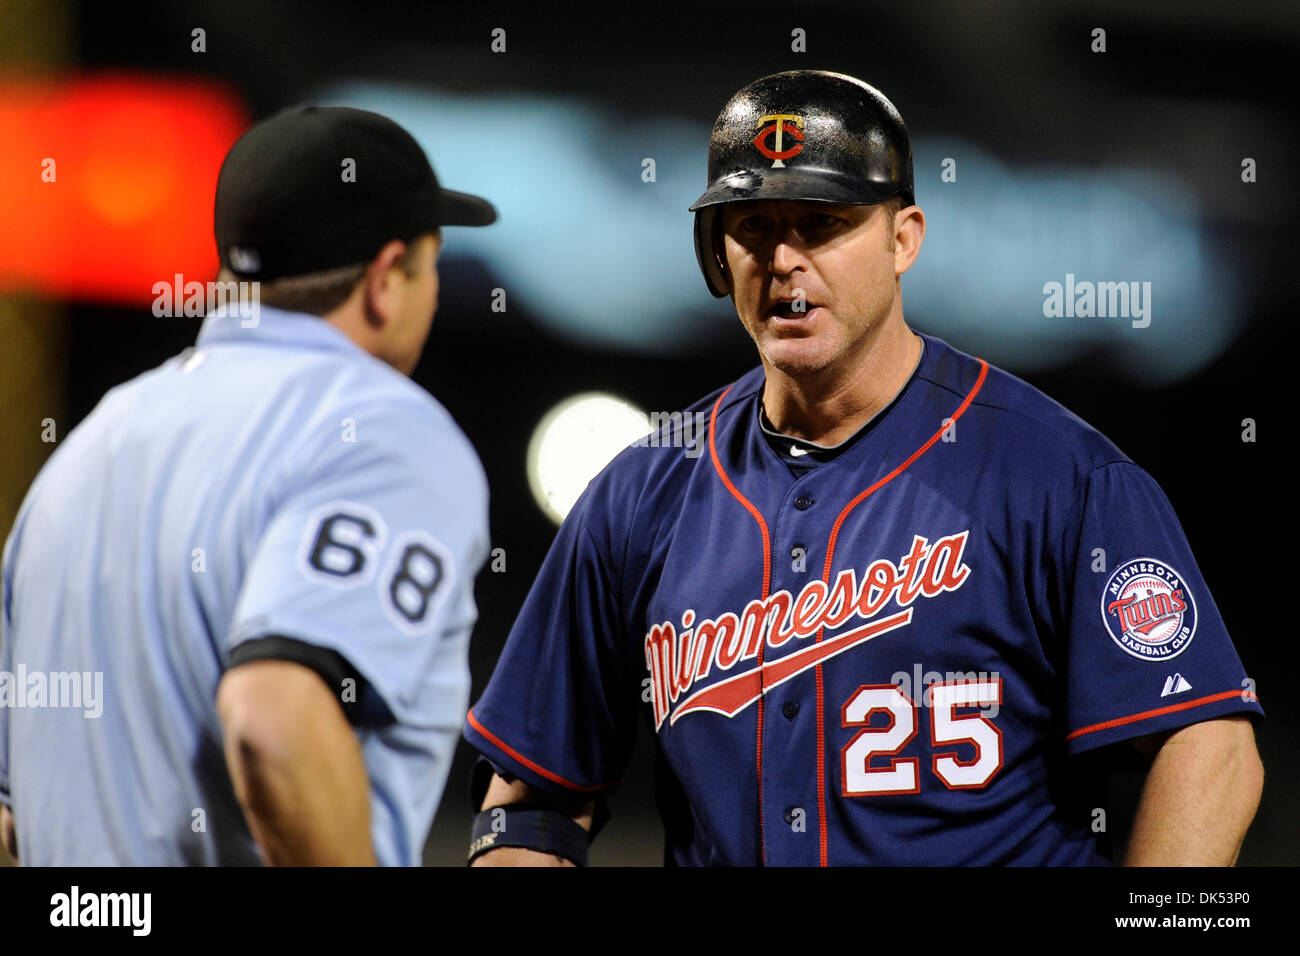 Apr. 18, 2011 - Baltimore, Maryland, U.S - Minnesota Twins DH Jim Thome (25) argues with home plate umpire Chris Guccione after a called strike 3 during a game between the Baltimore Orioles and the Minnesota Twins, the Twins defeated the Orioles 5-3 (Credit Image: © TJ Root/Southcreek Global/ZUMApress.com) Stock Photo